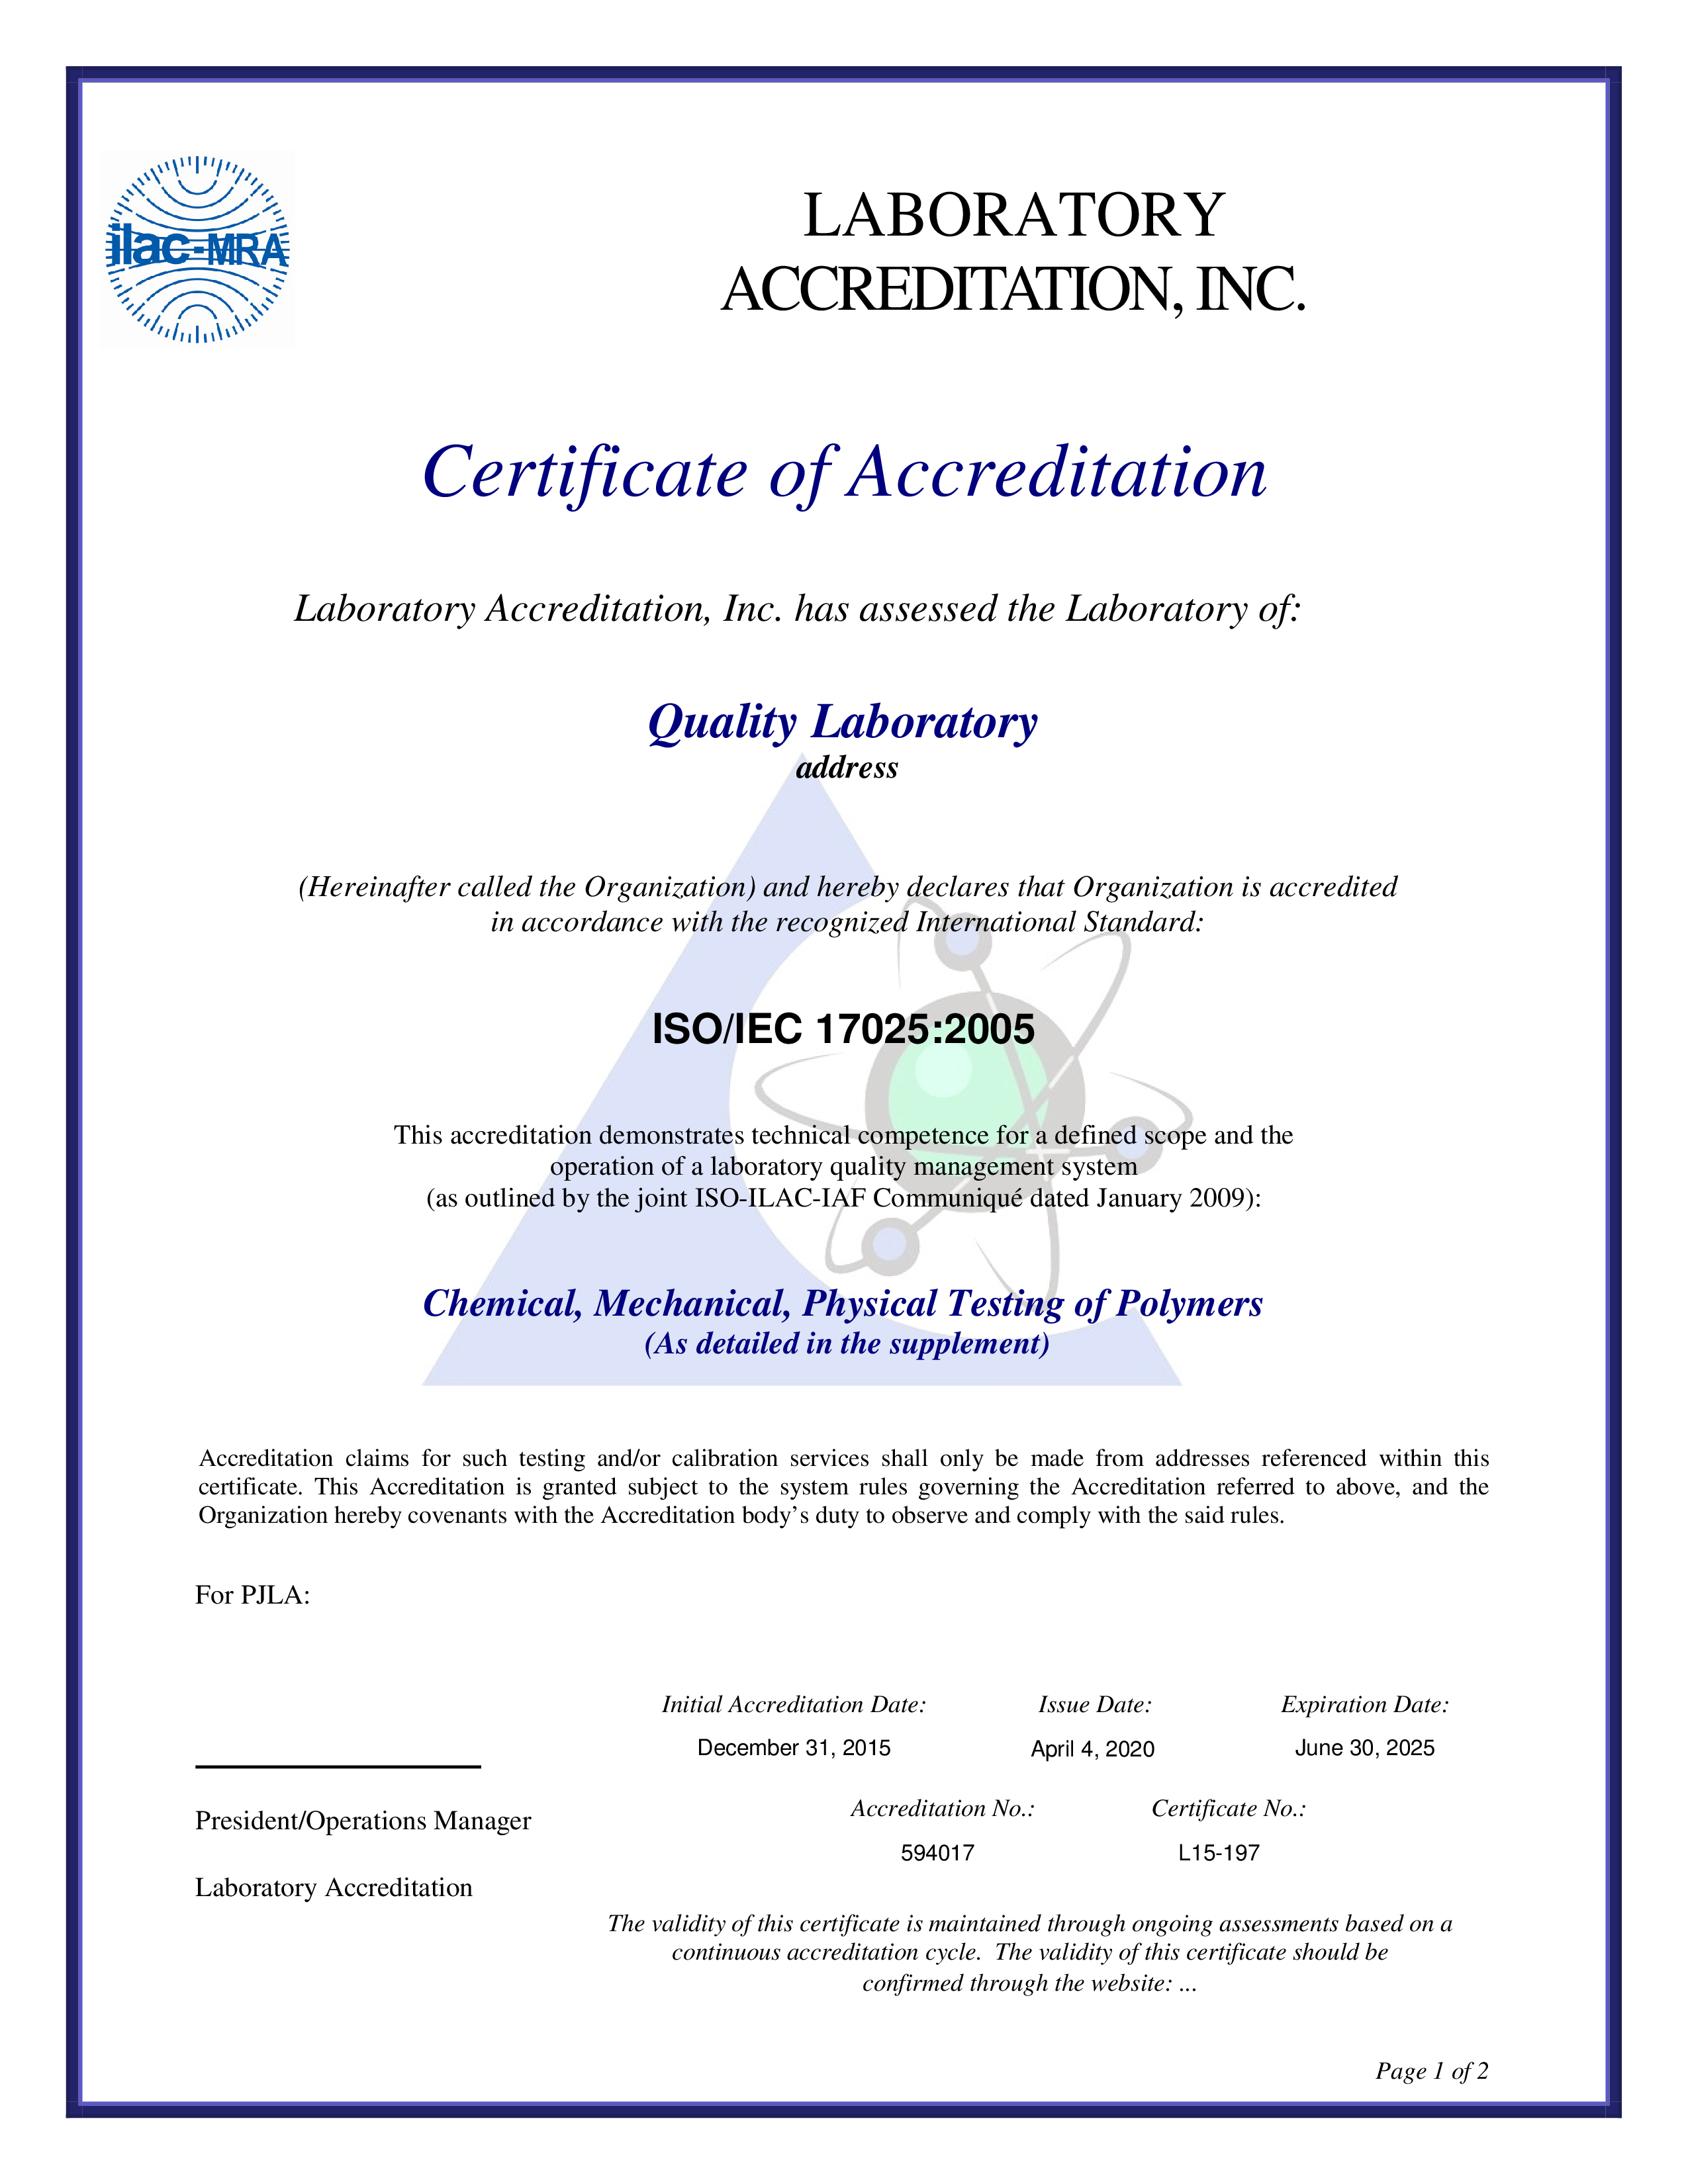 Laboratory Quality Management Certificate main image